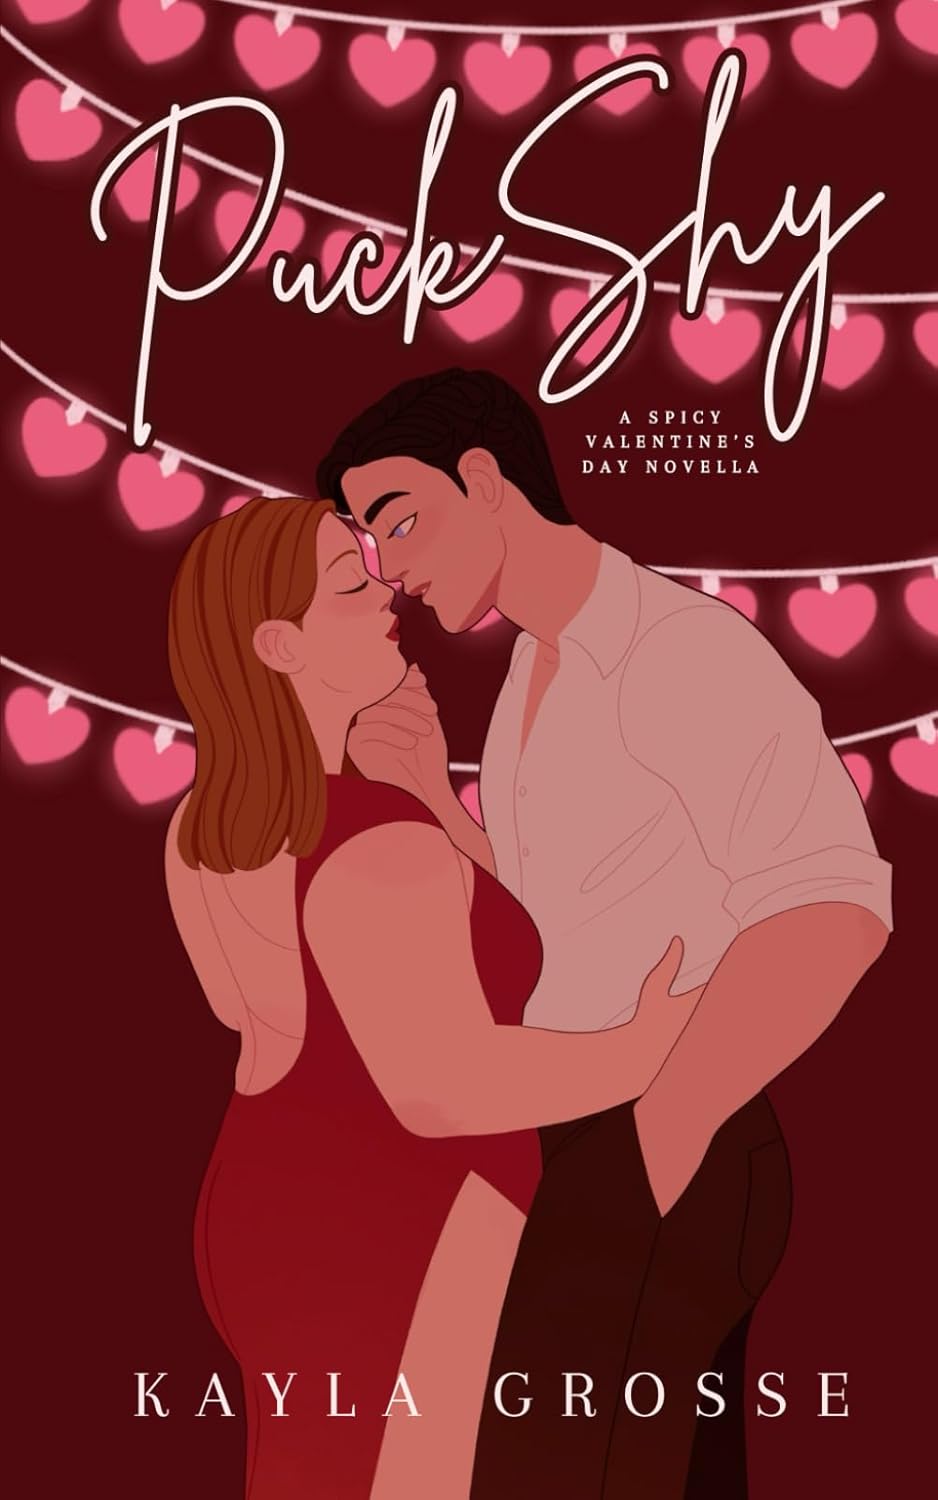 Puck Shy  Paperback by Kayla Grosse (Author)